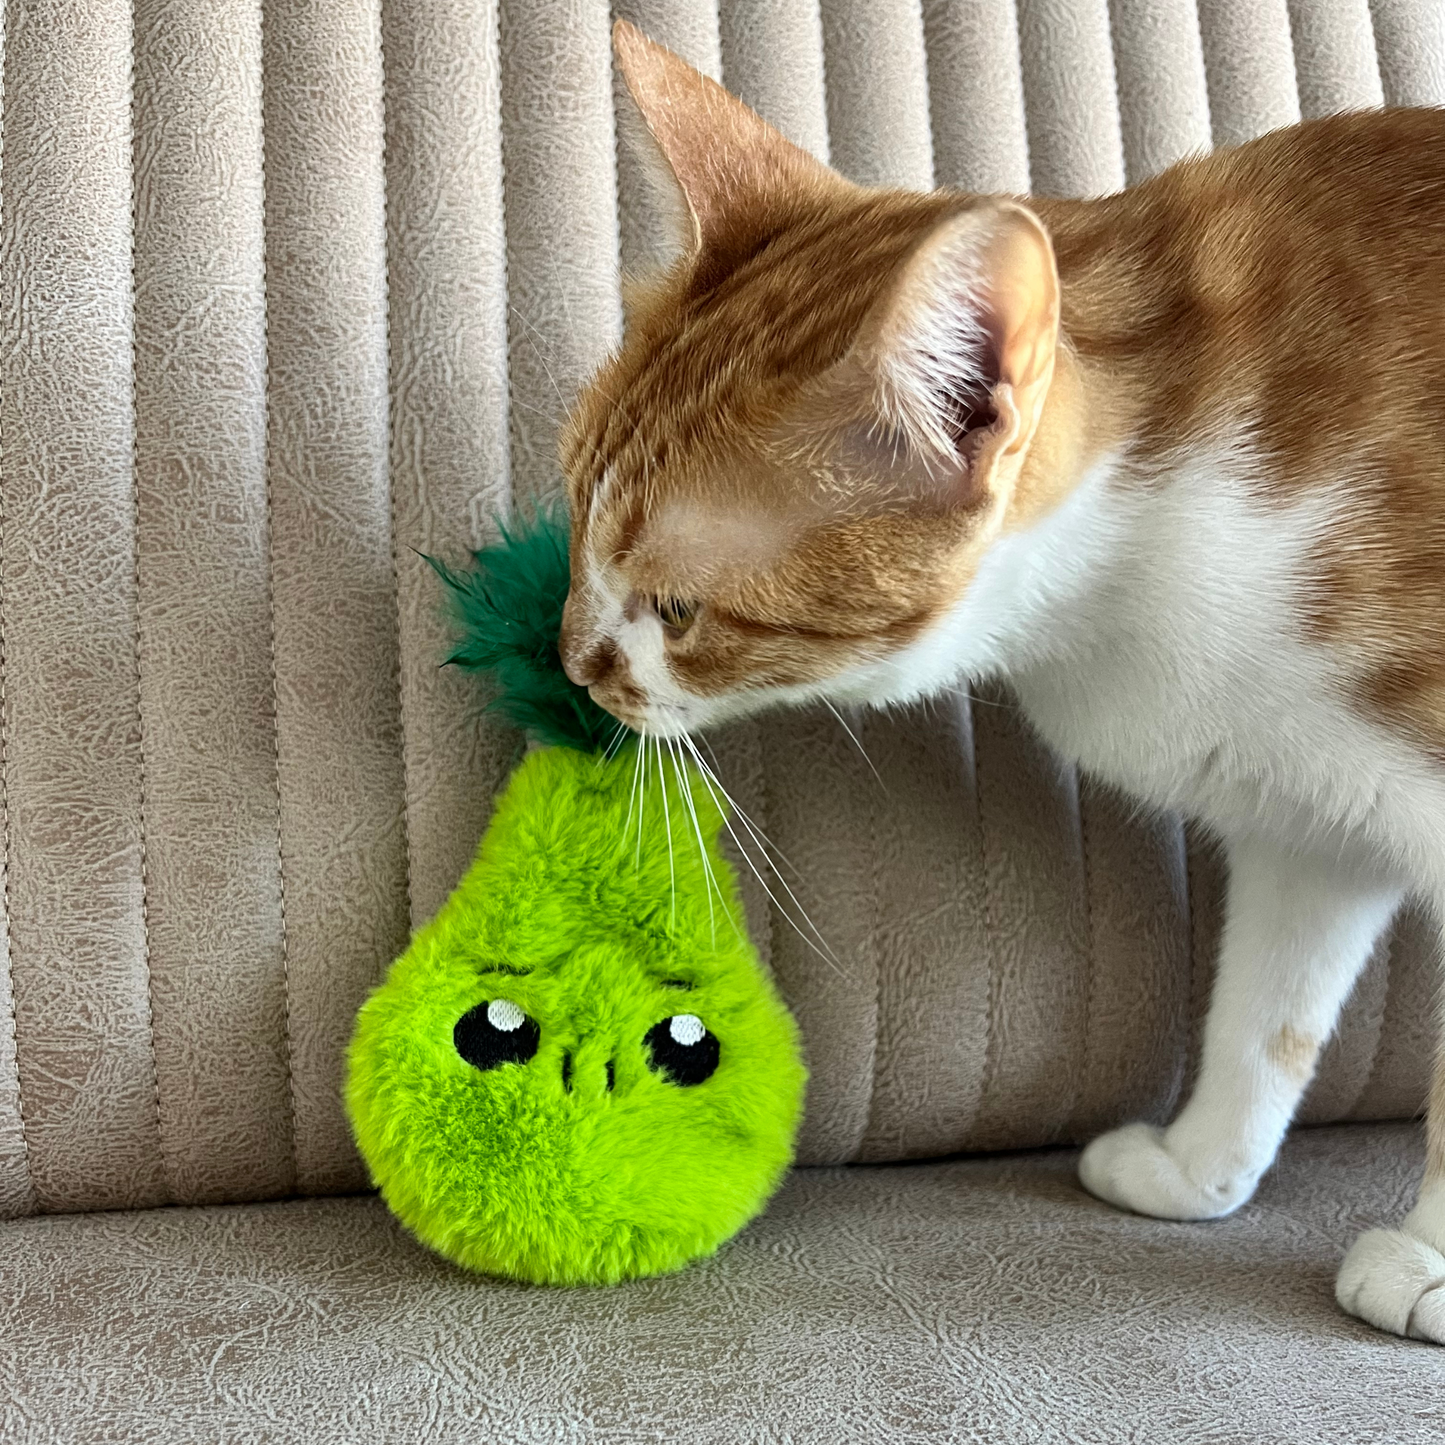 MyMeow - Krazy Pear Refillable Cat Toy with 10 North American Natural Catnip Refill Bags